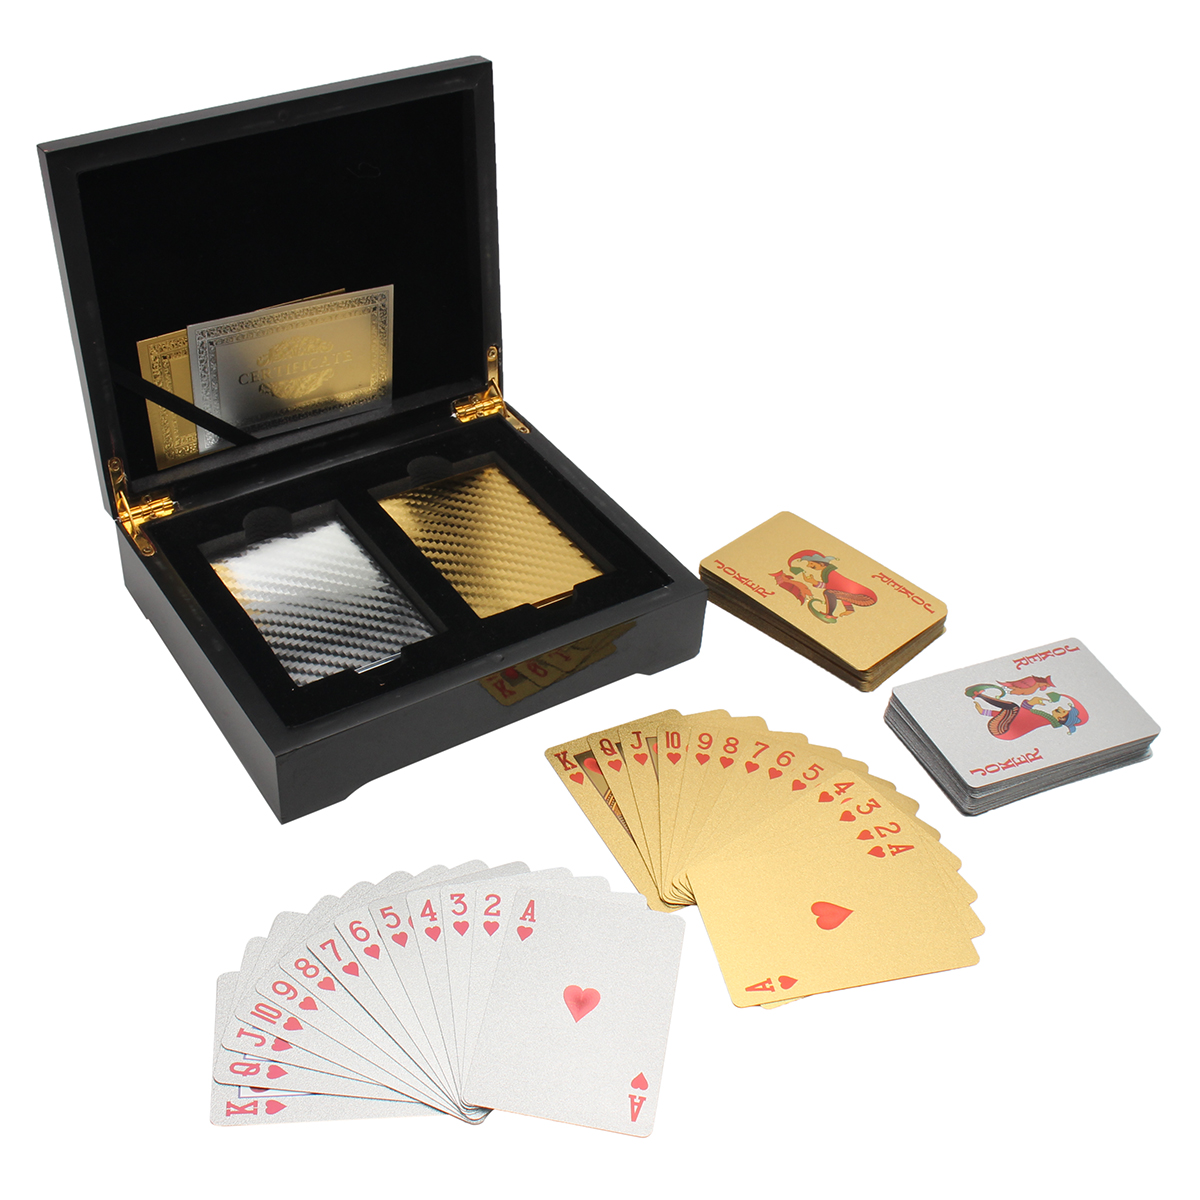 

24k Gold / Silver Foil Playing Cards 2 Deck Poker Brown Wooden Box Gifts Game Casino